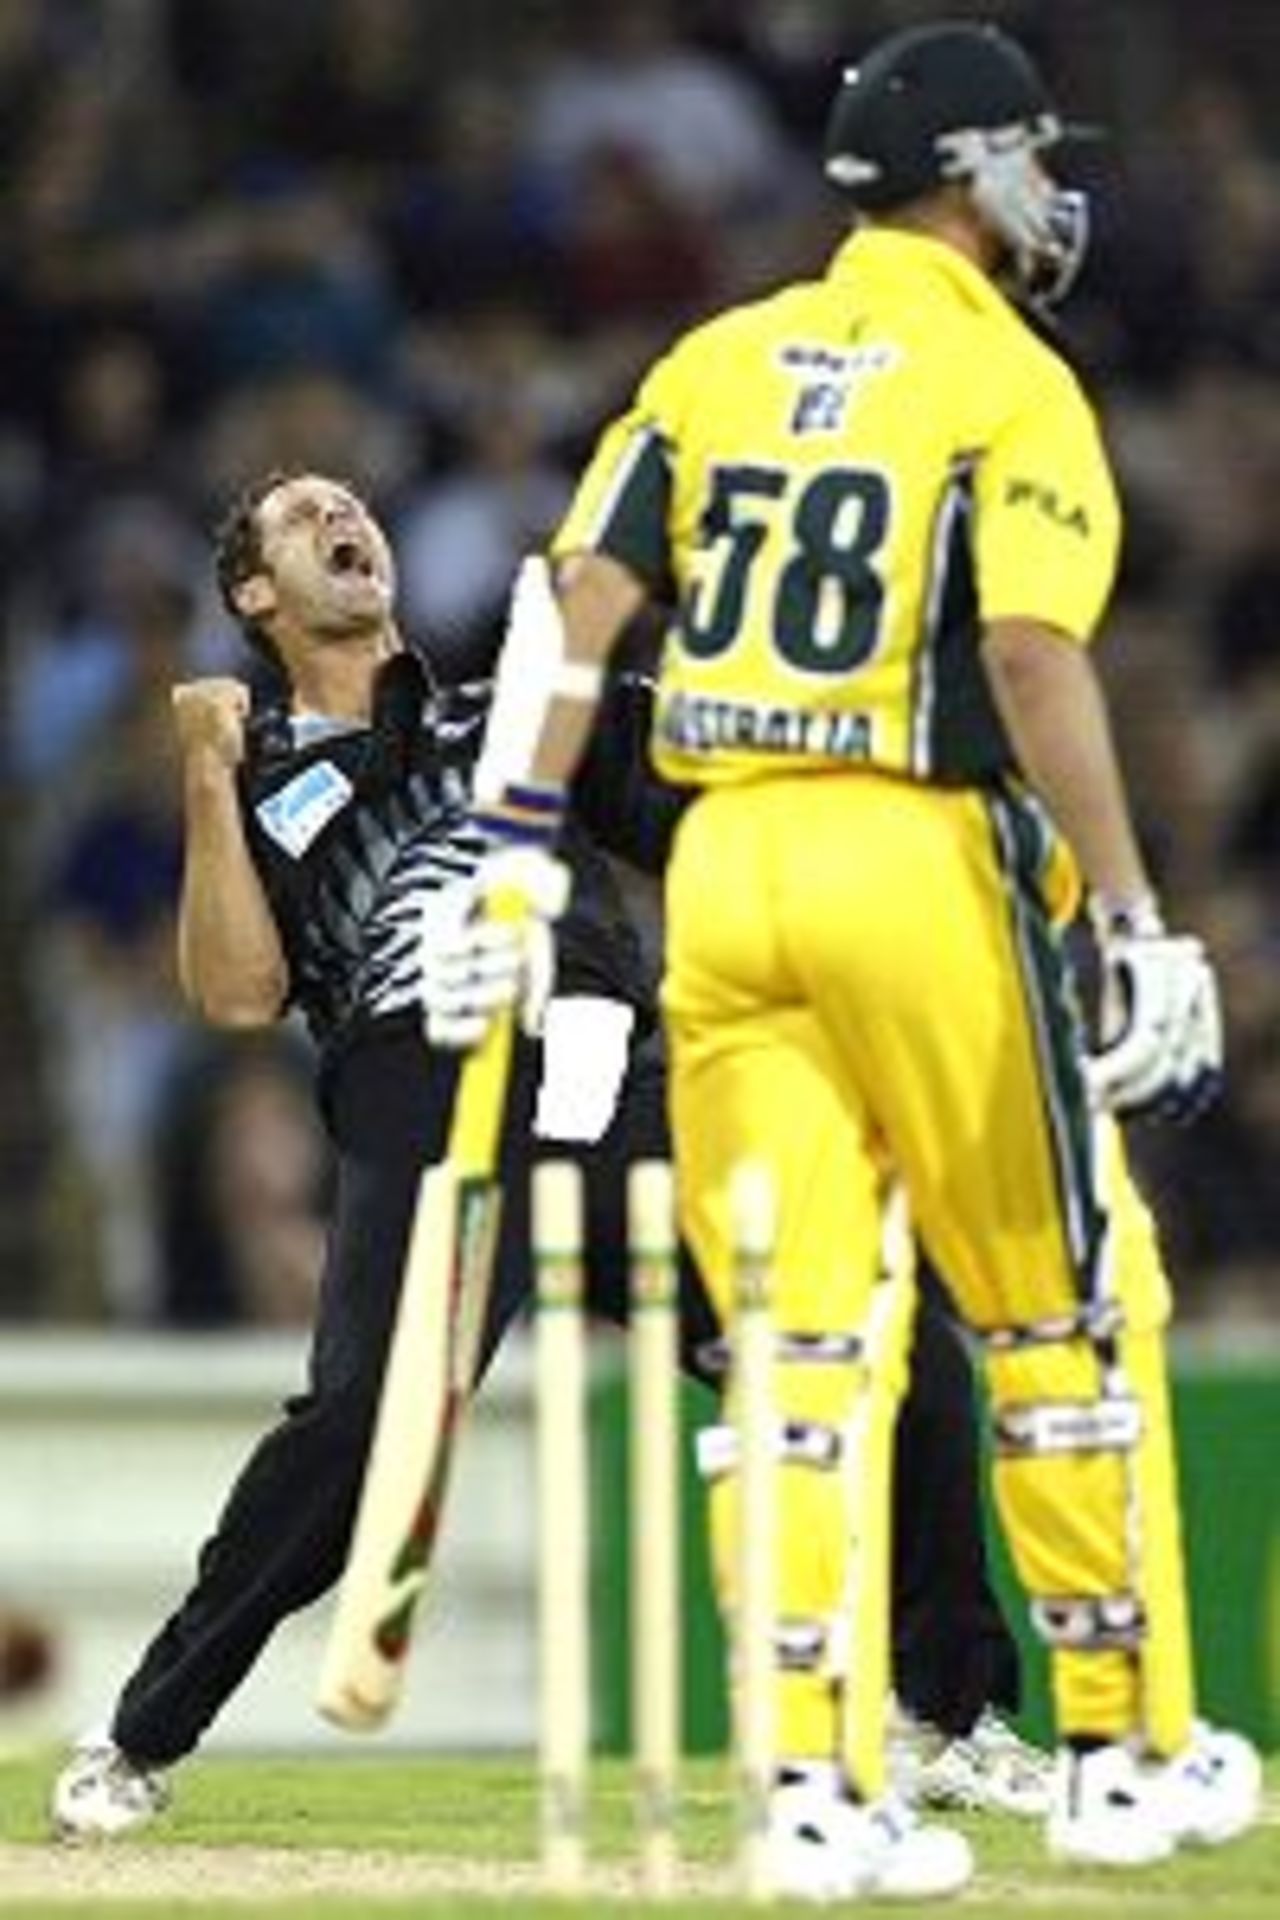 11 Jan 2002: Chris Cairns of New Zealand celebrates after bowling Brett Lee of Australia, during the VB Series One Day International between Australia and New Zealand, played at the Melbourne Cricket Ground, Melbourne, Australia.